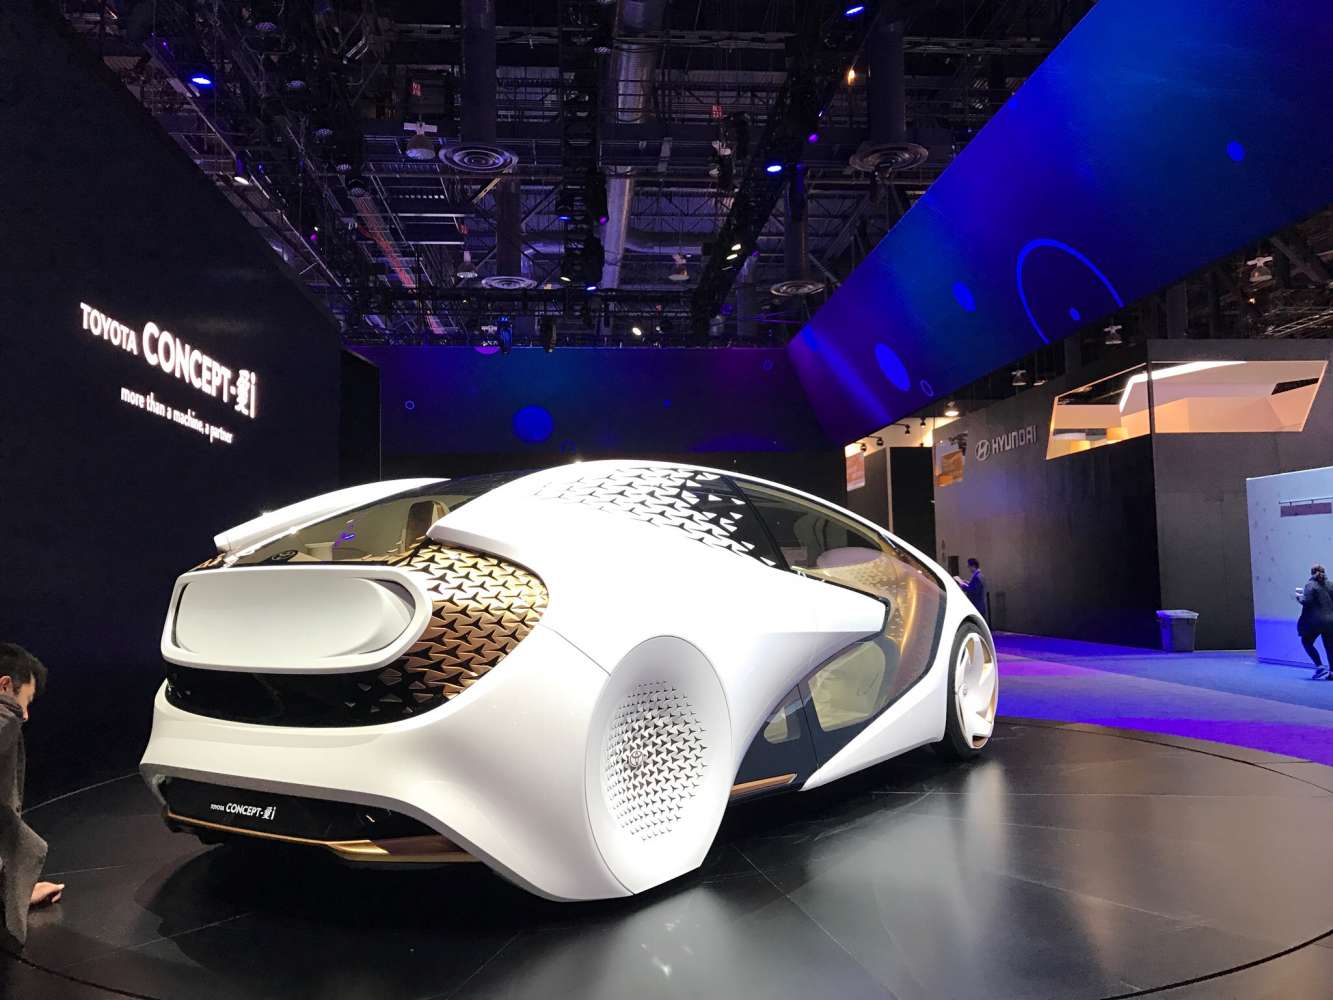 Toyota used the occasion to show its Concept-i car